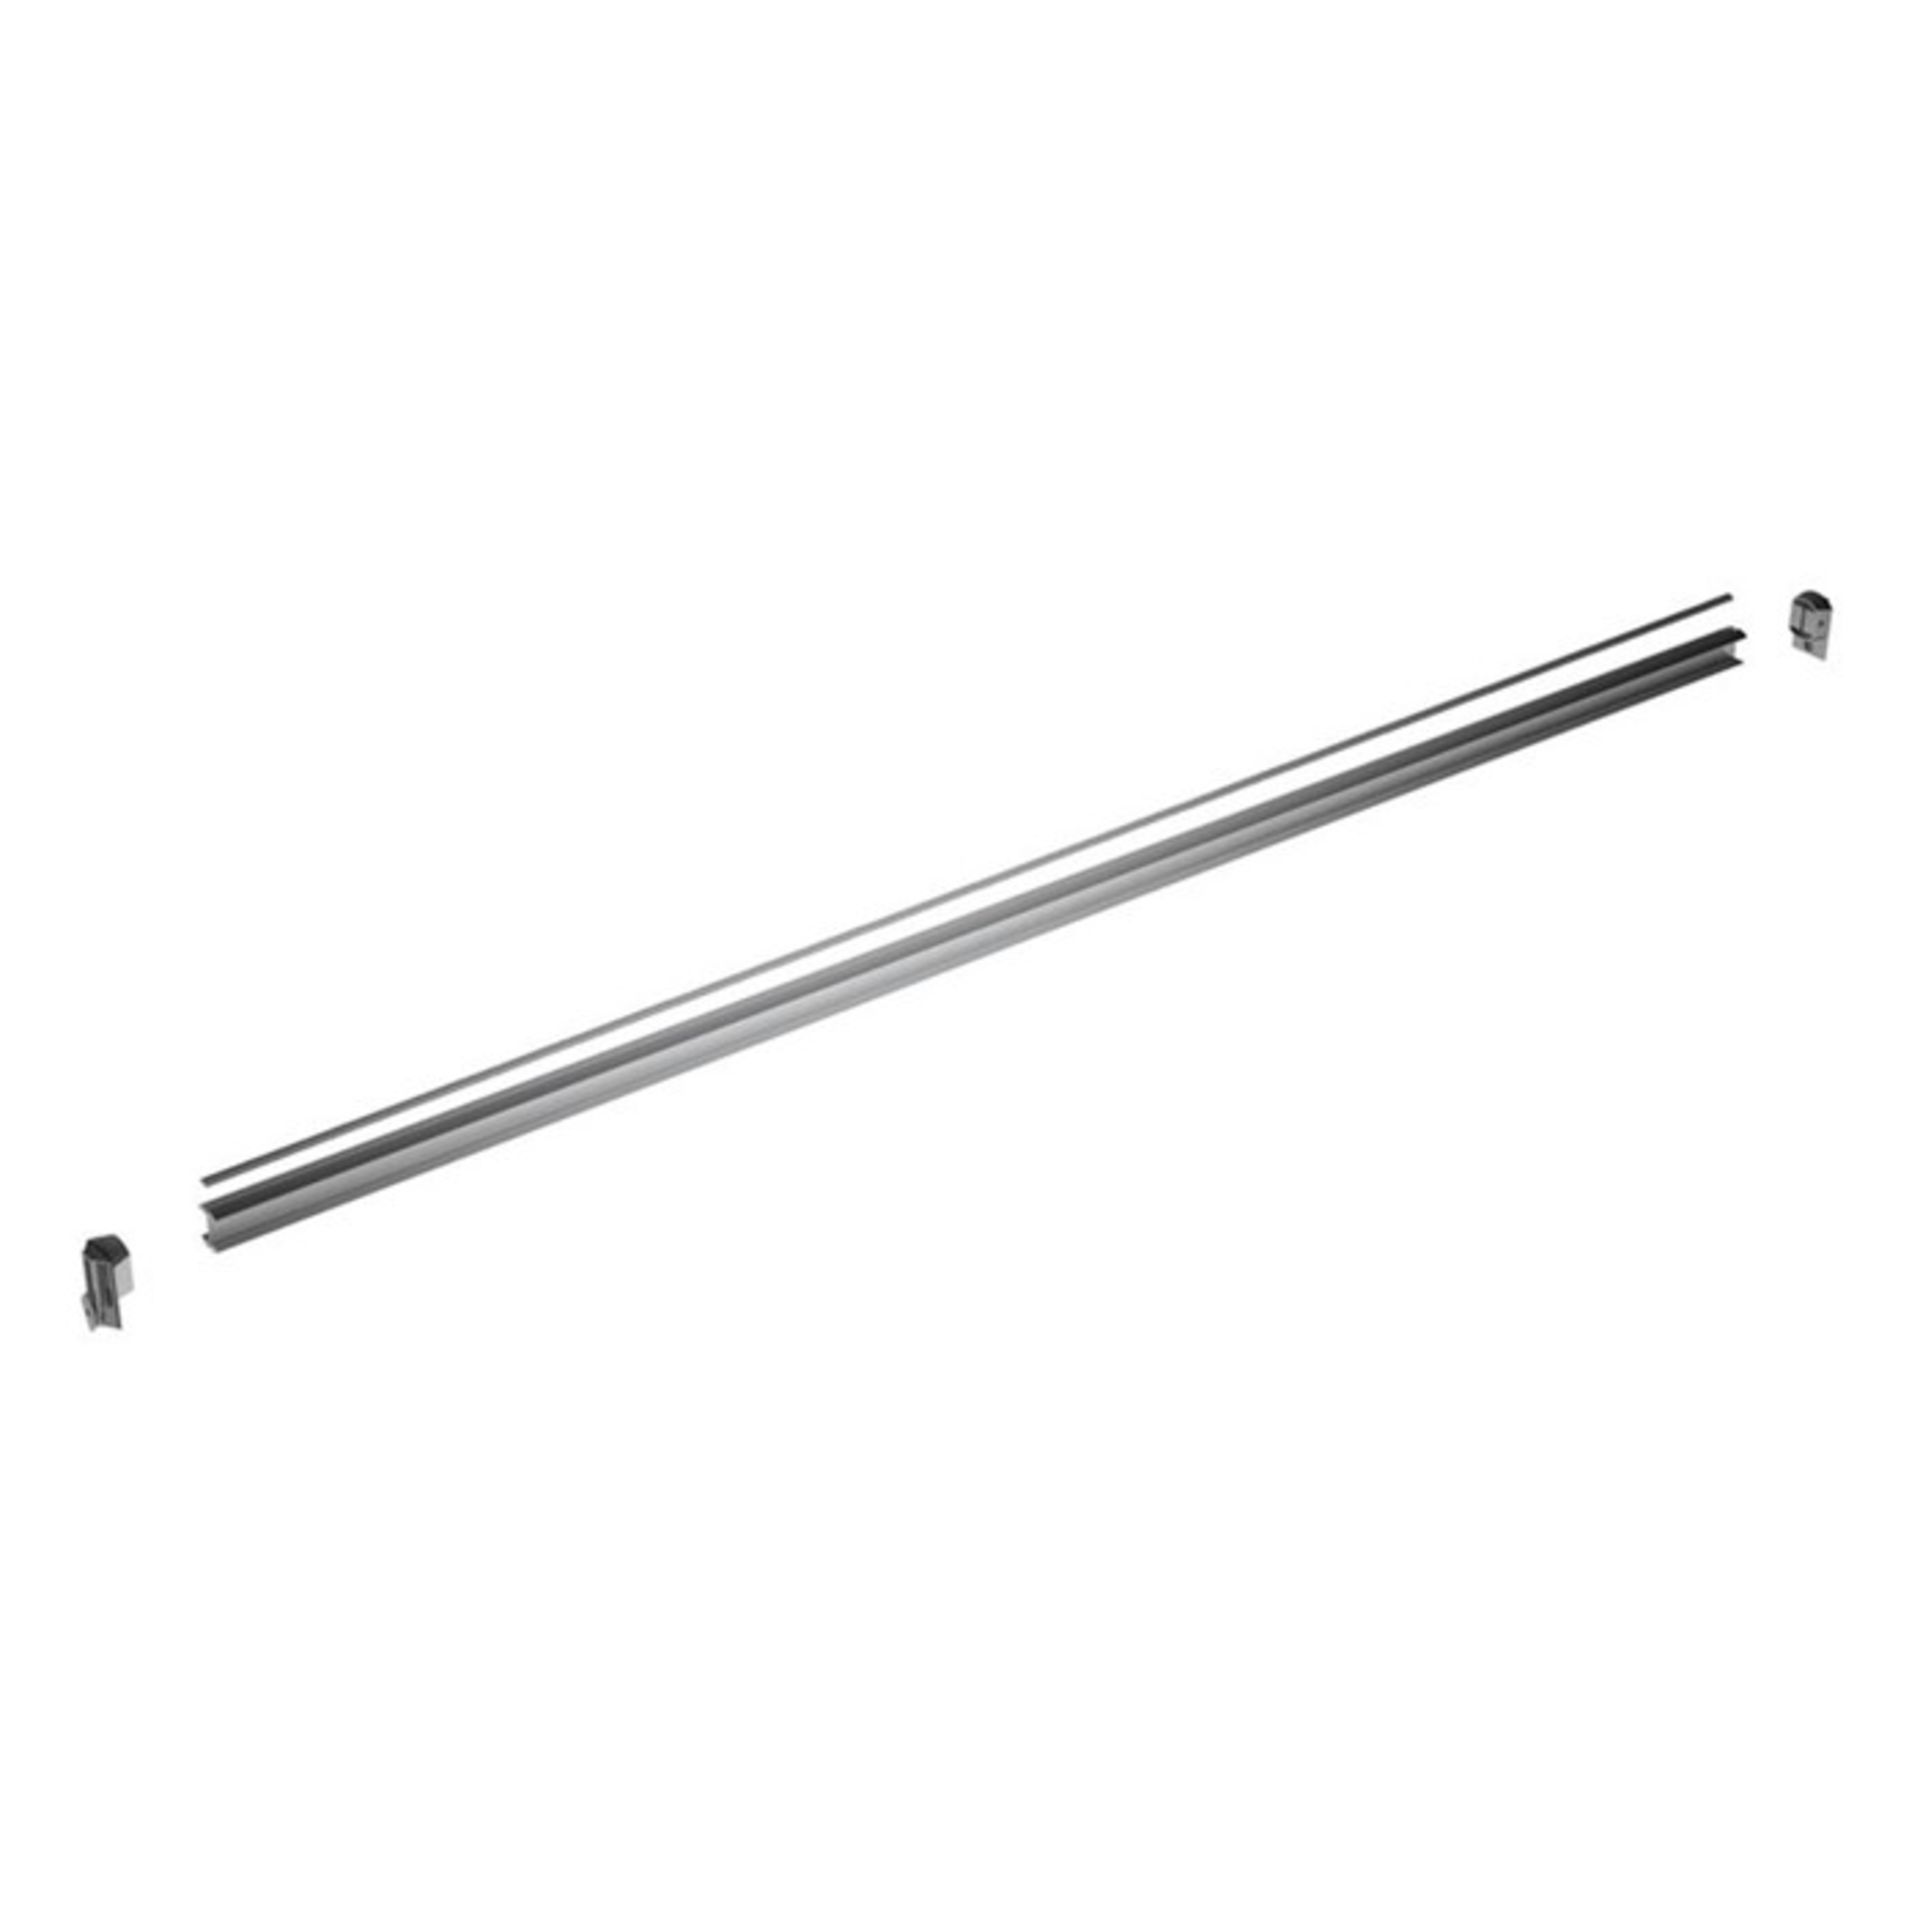 Space Pro Relax 122cm Hanging Rail(SPPO1018 - 15388/44) 3I